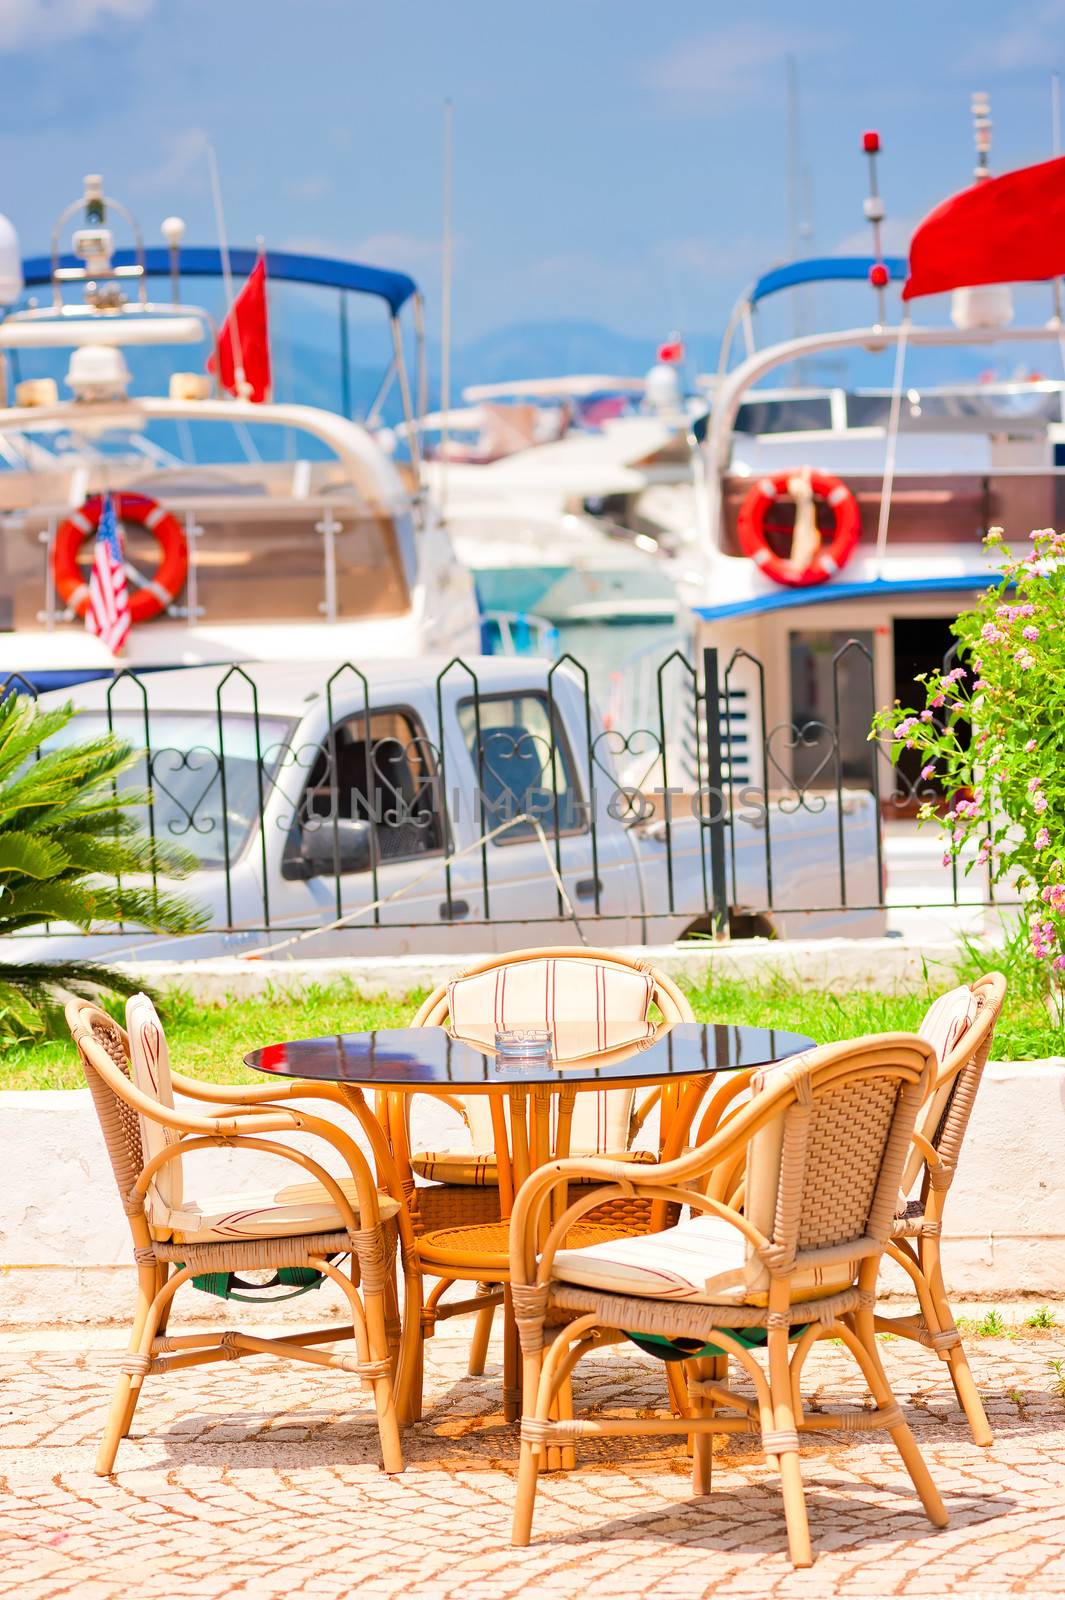 table against the background of the yacht harbor by kosmsos111